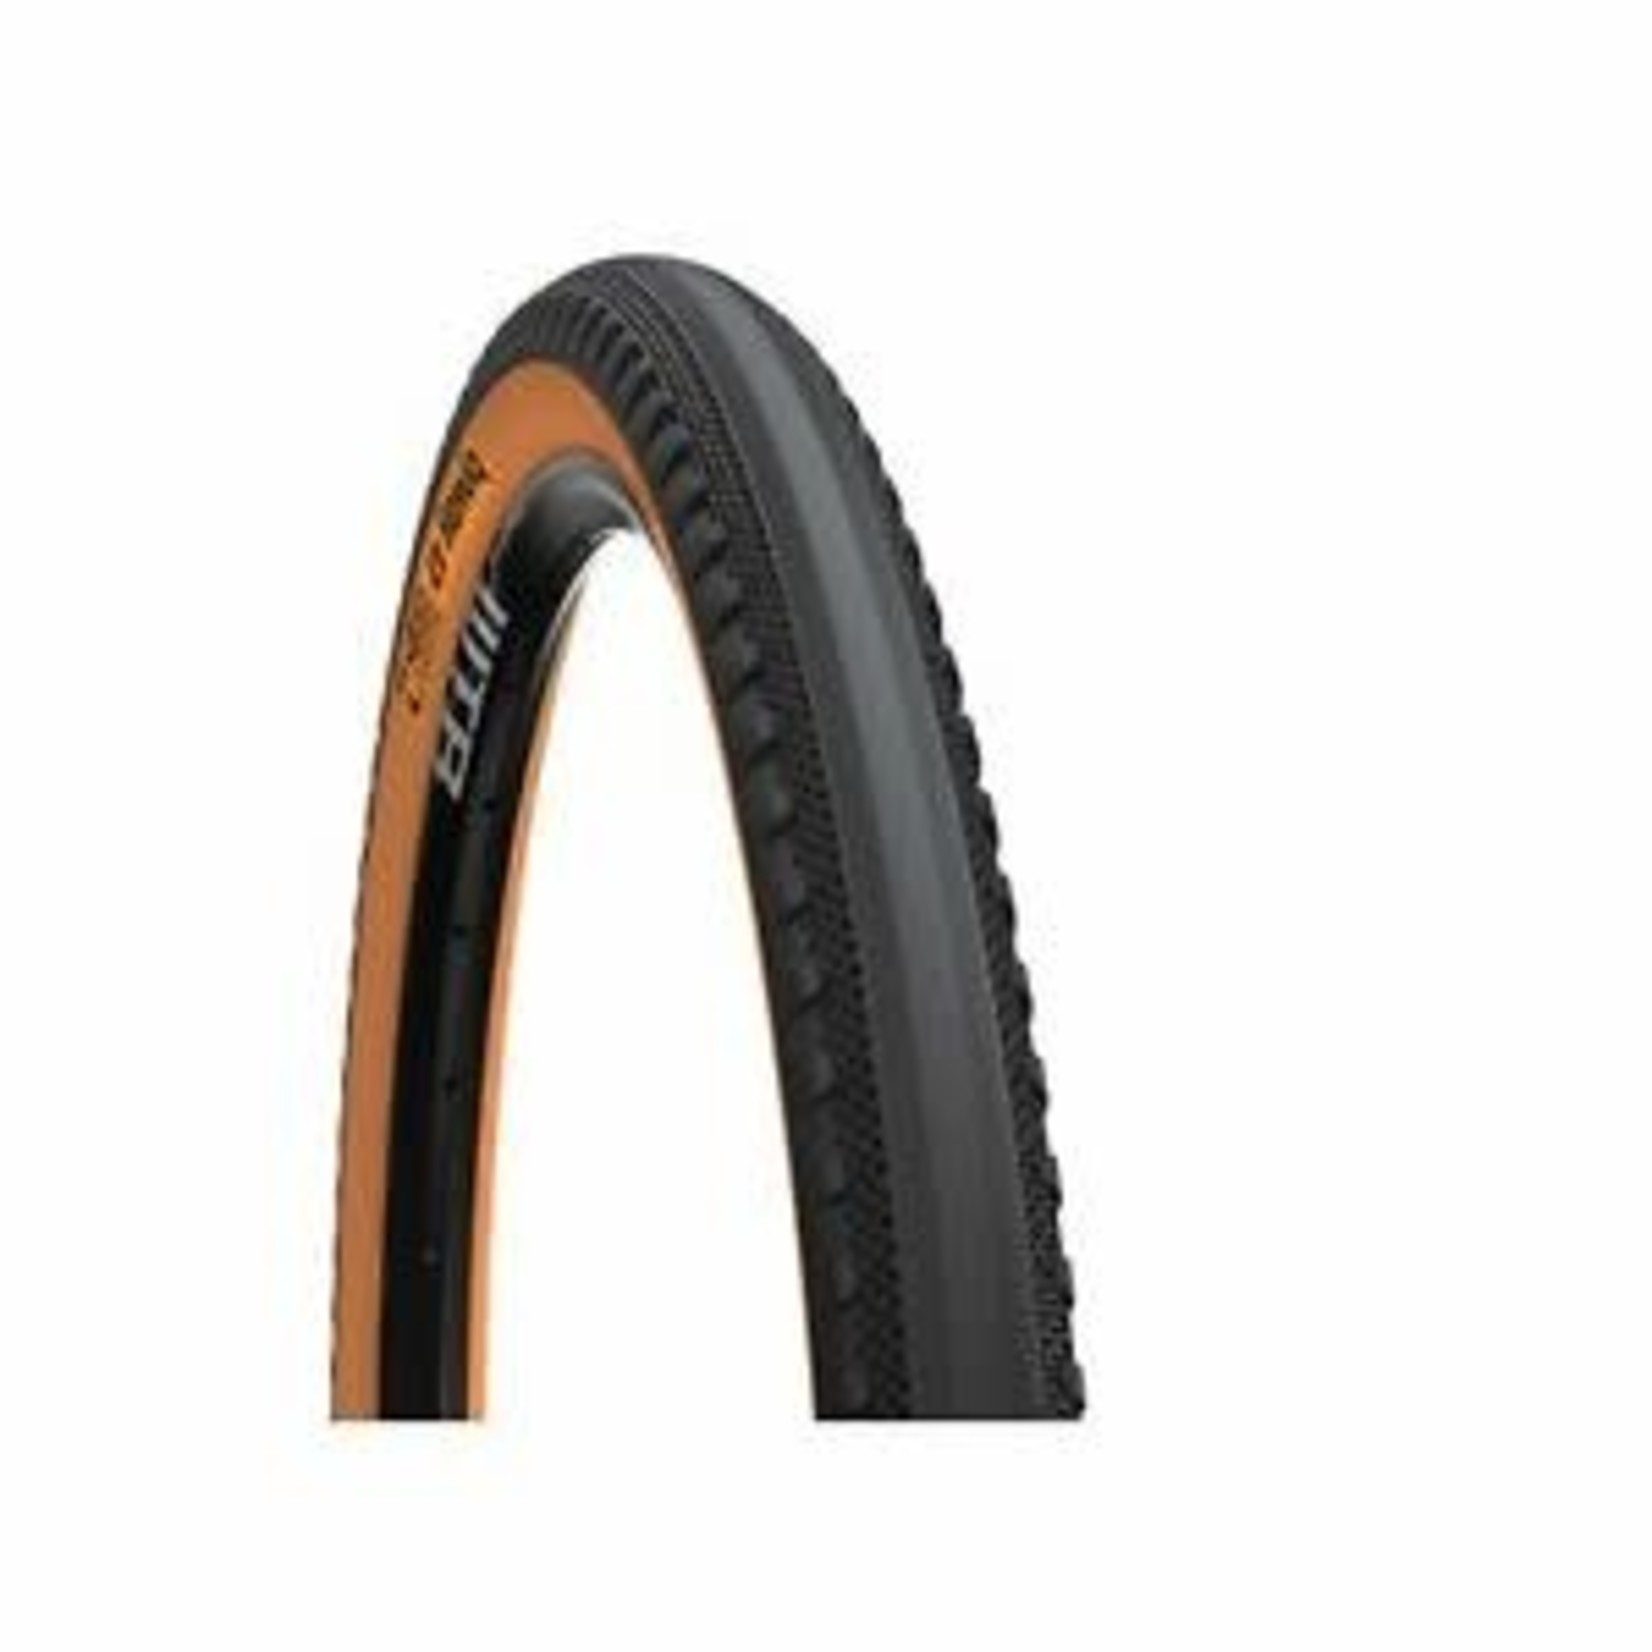 Byway Tire - 650 x 47, TCS Tubeless, Folding, Black/Brown